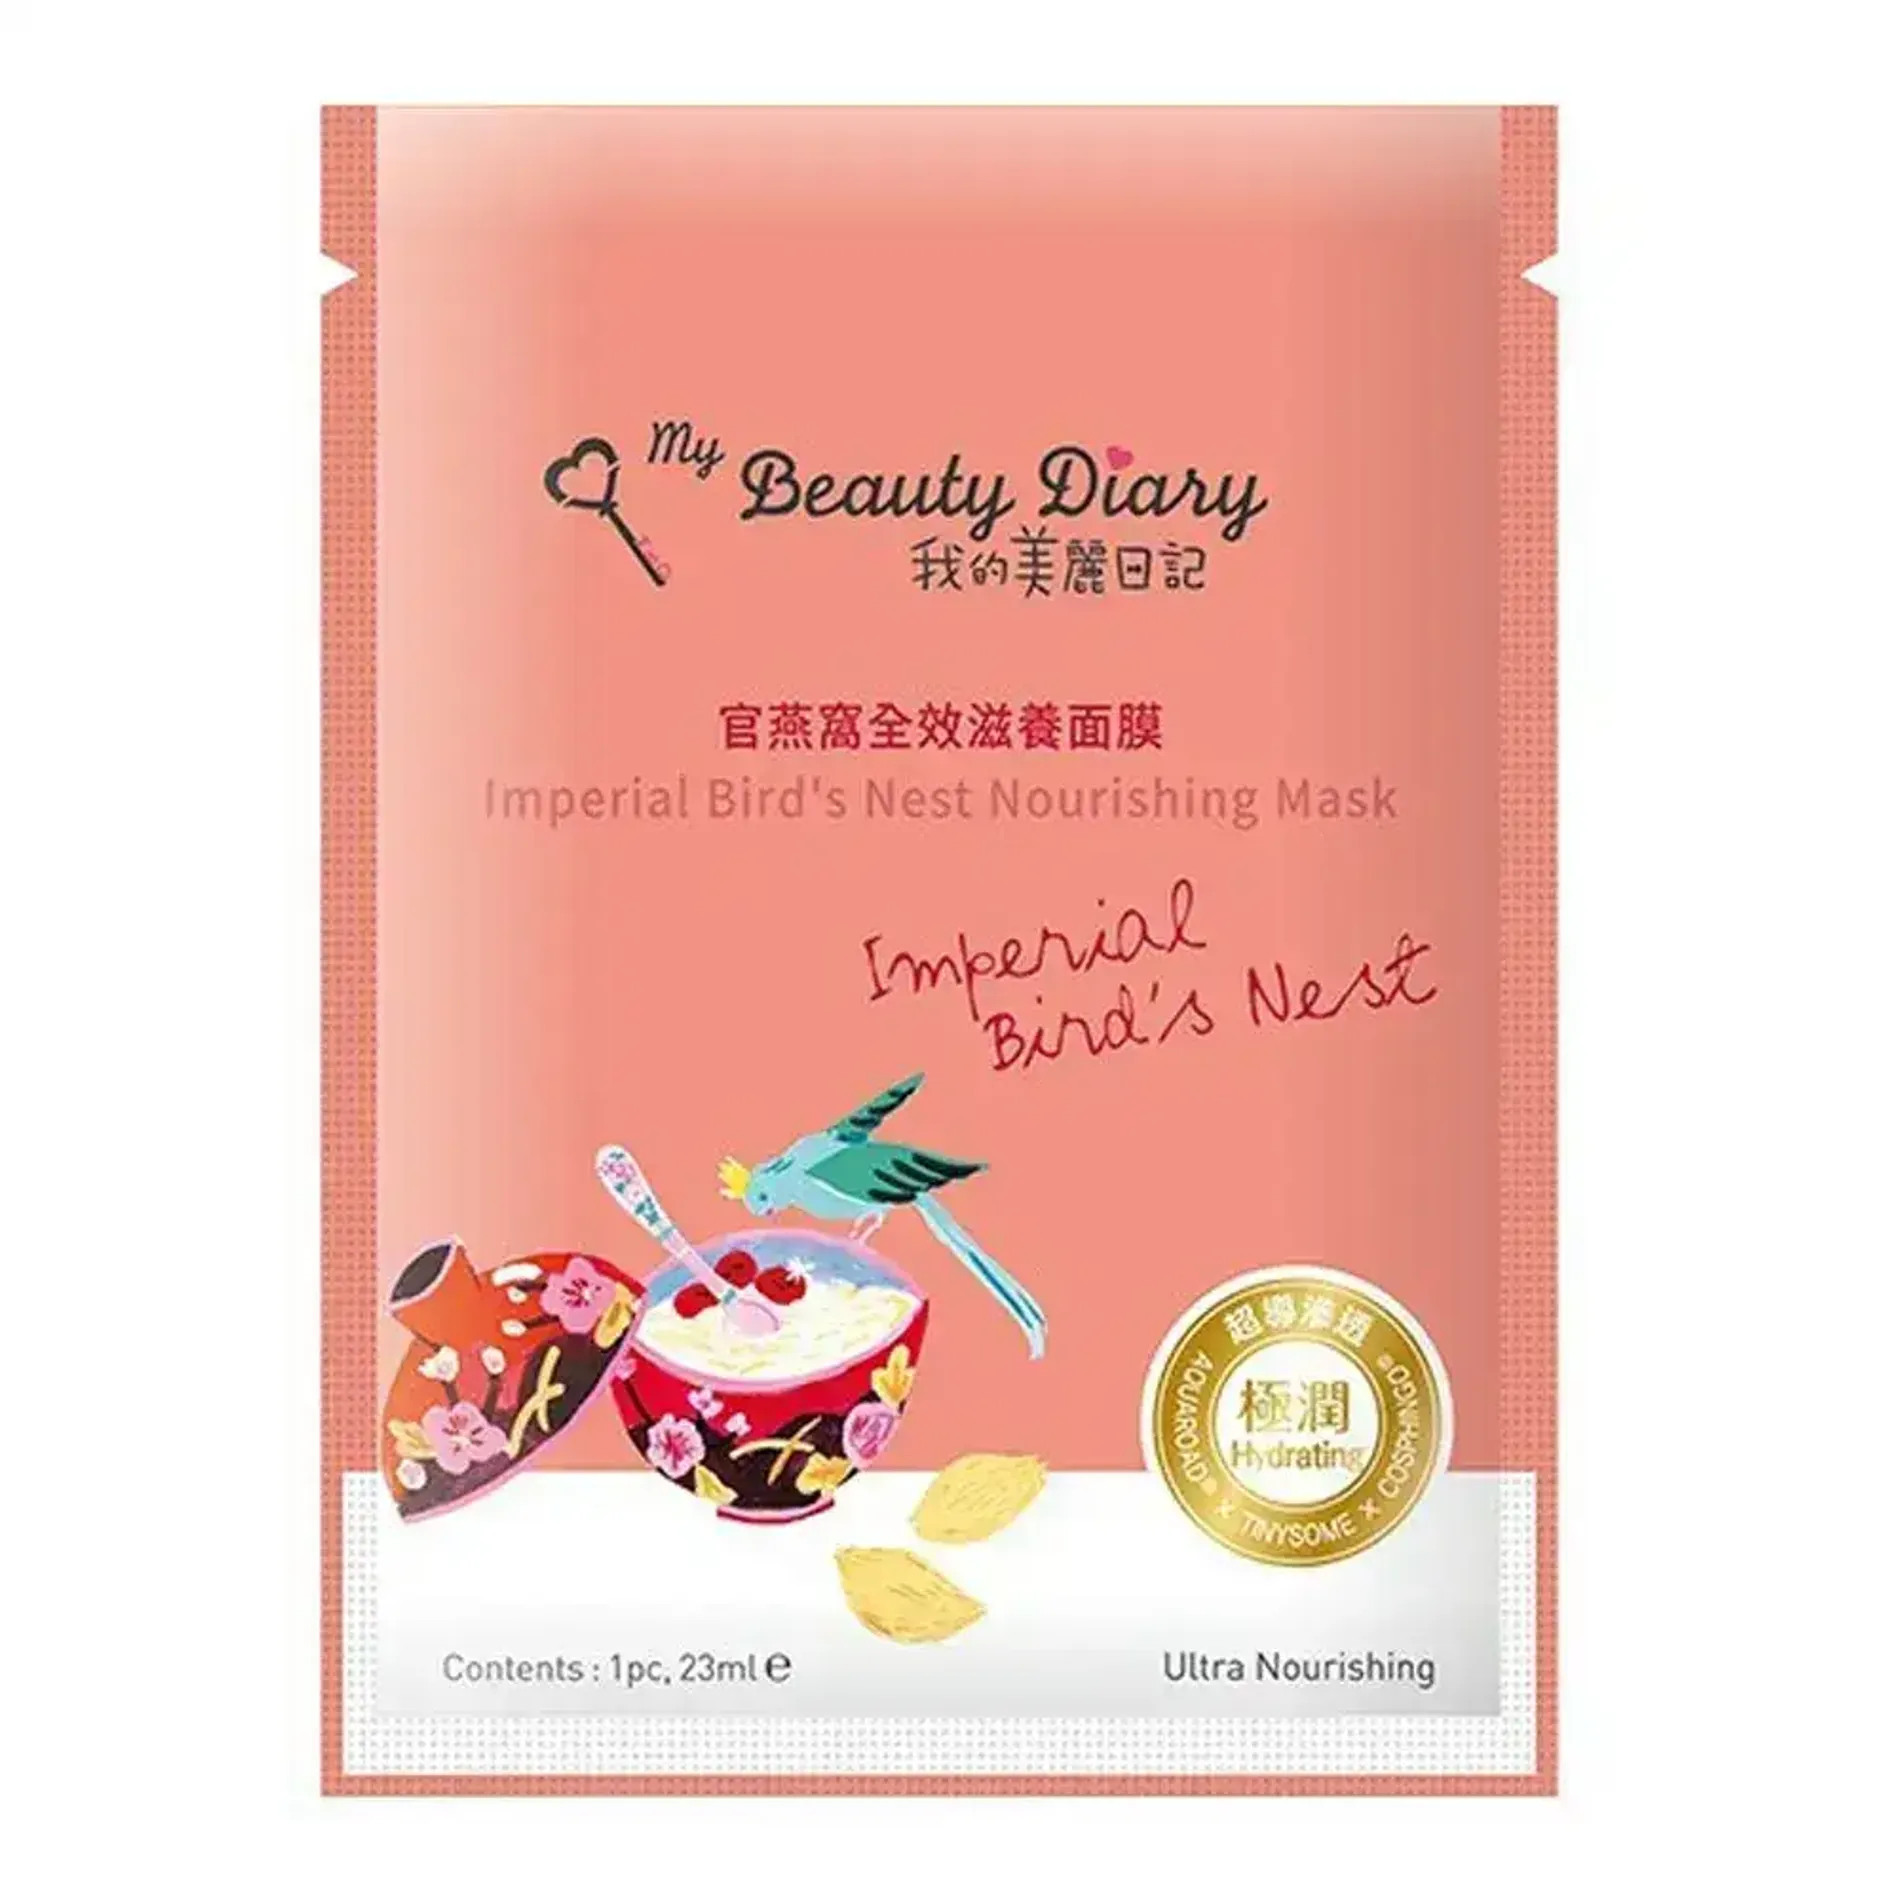 mat-na-duong-chat-to-yen-do-my-beauty-diary-imperial-bird-s-nest-emolliating-mask-23ml-1